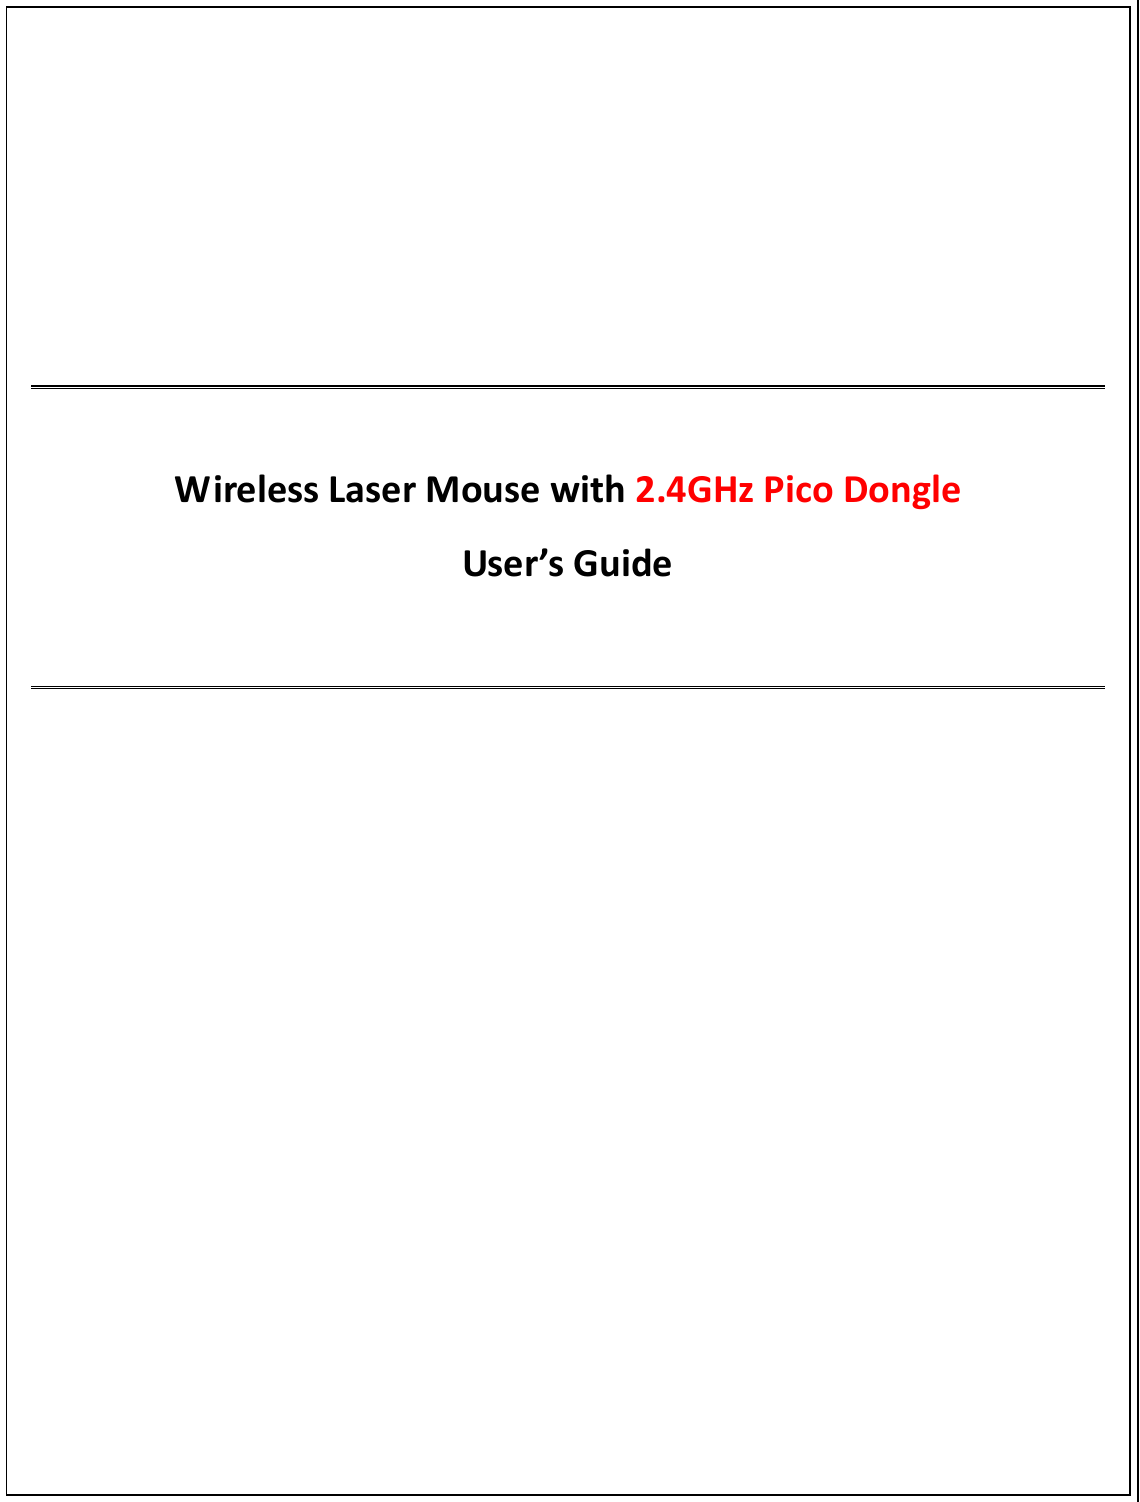 WirelessLaserMousewith2.4GHzPicoDongleUser’sGuide